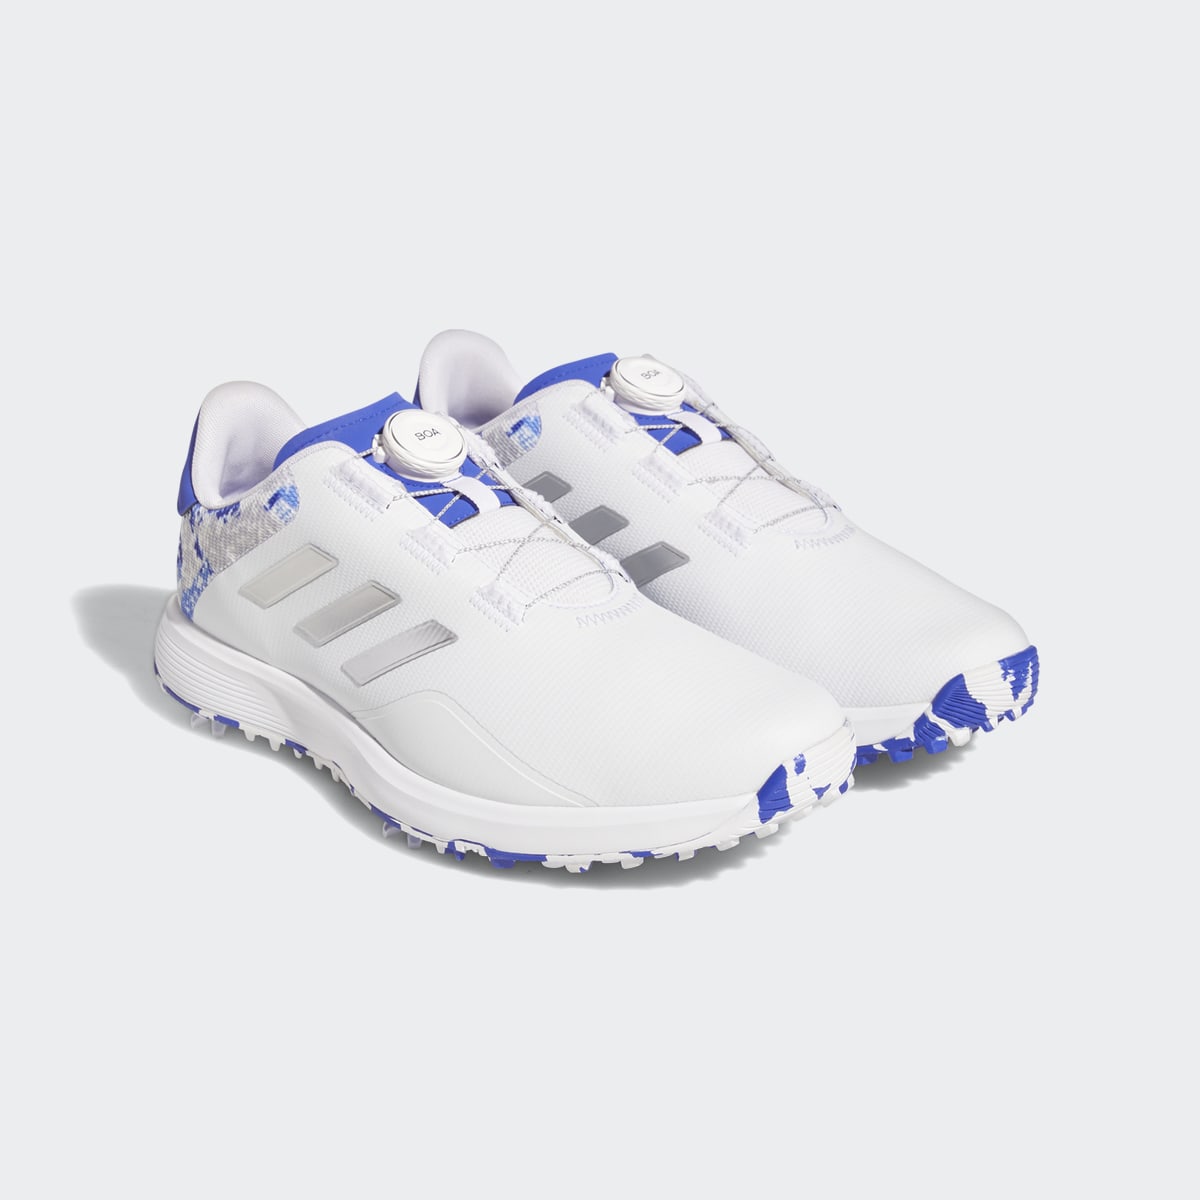 Adidas S2G BOA Wide Shoes. 5